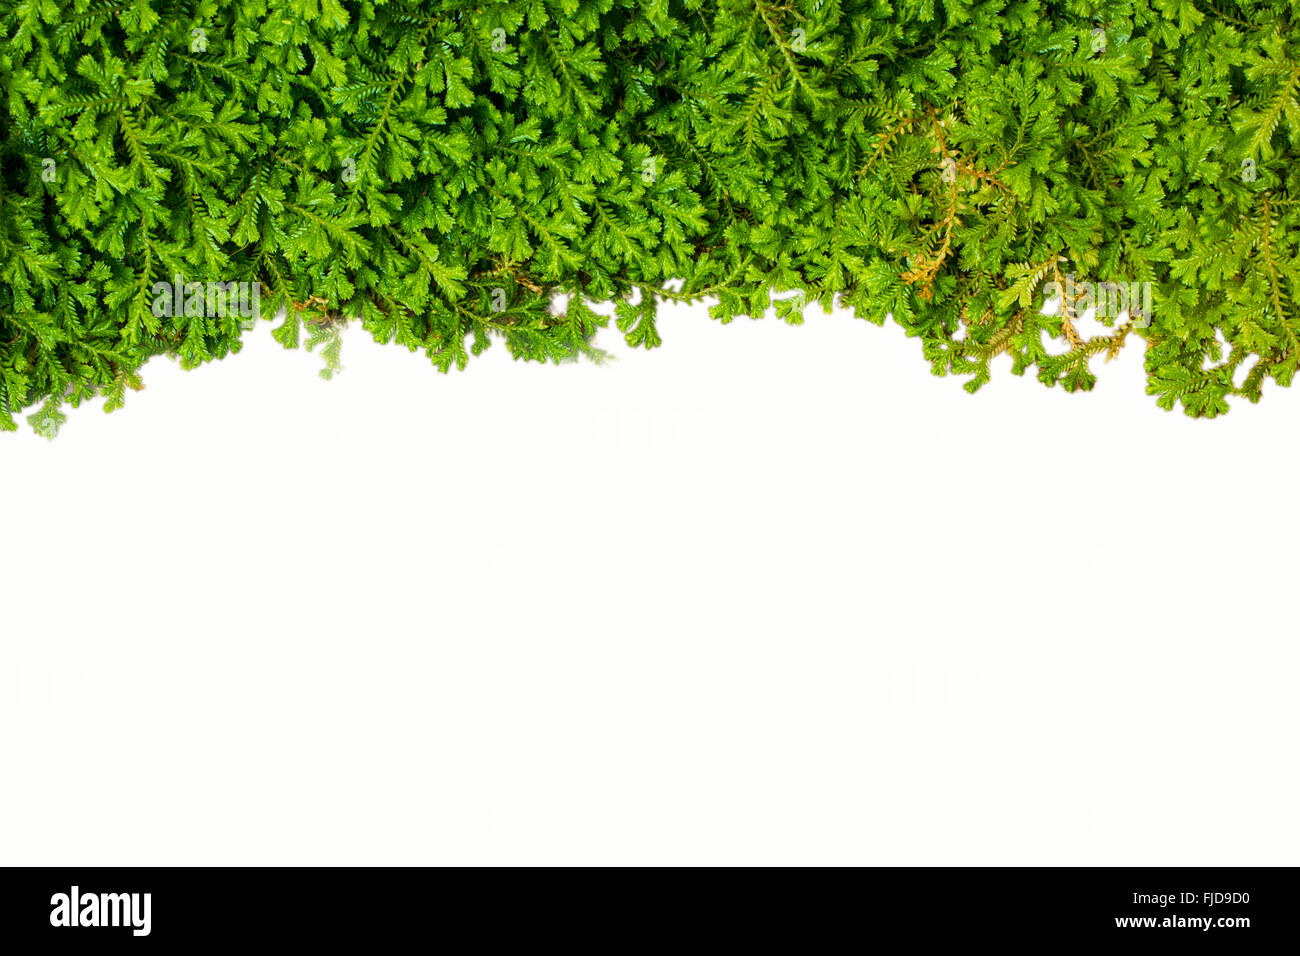 A photo of Spike Moss texture on the white isolate background Stock Photo